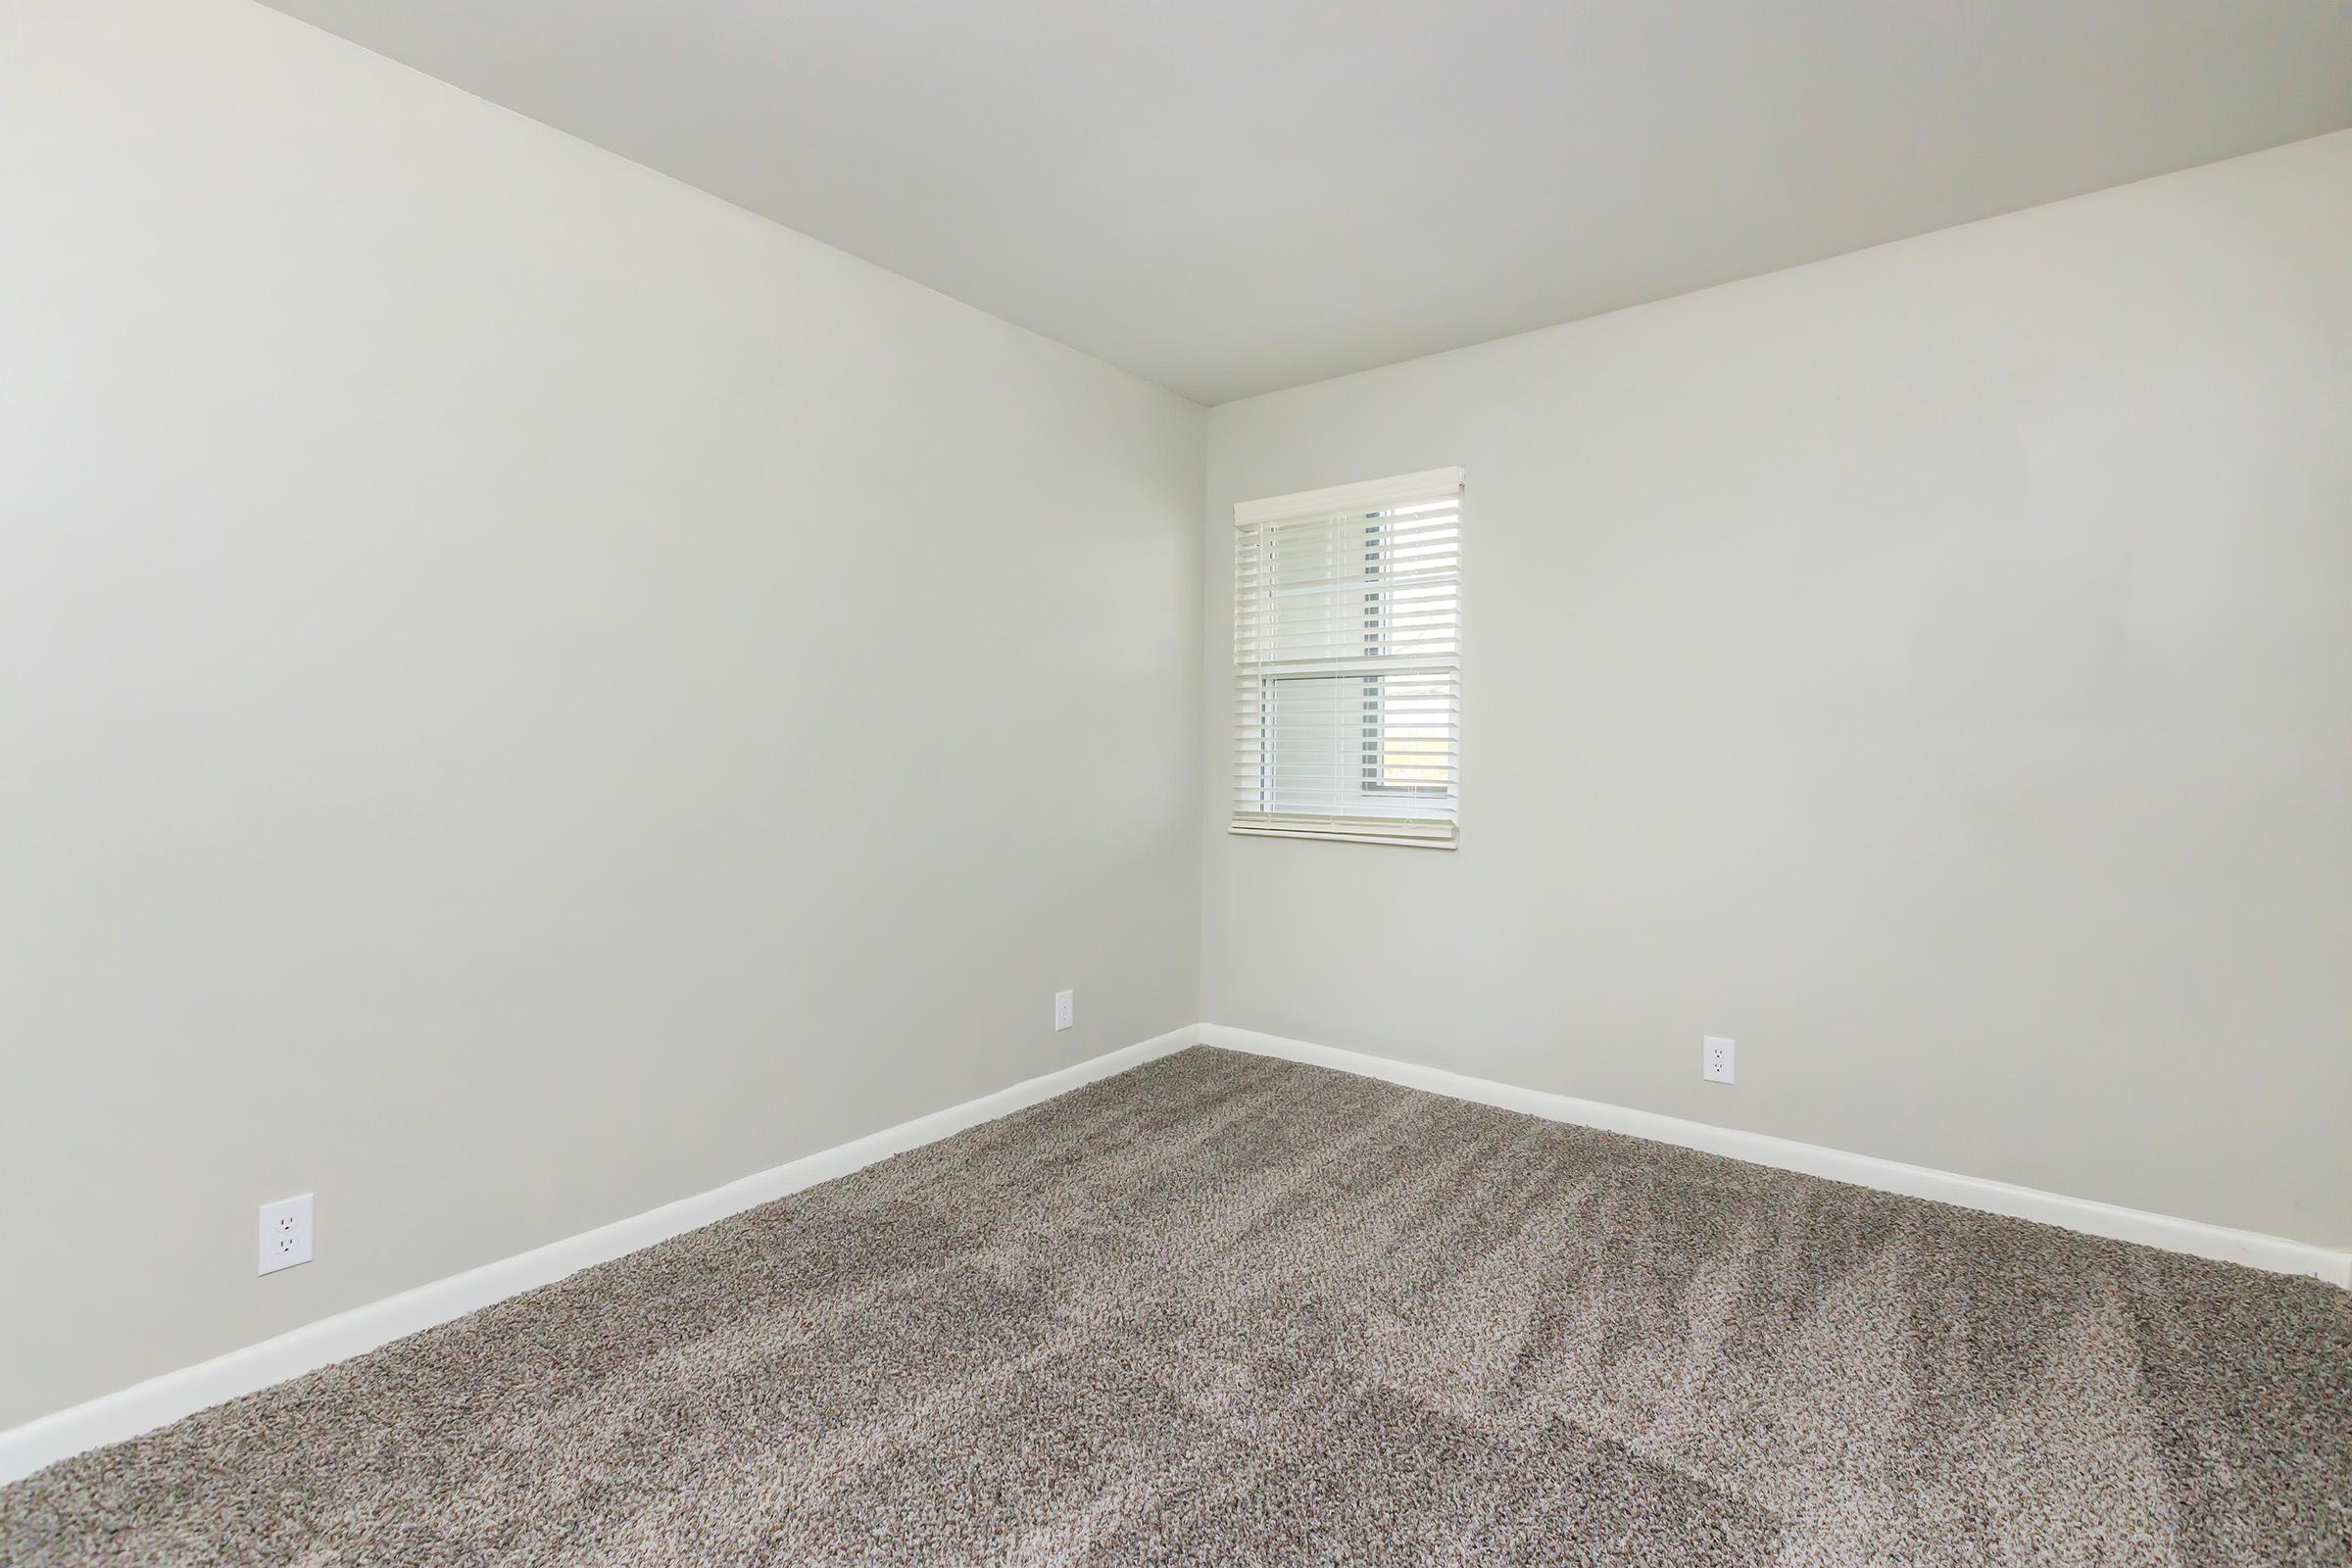 Plush Carpeted Floors at River West Apartments